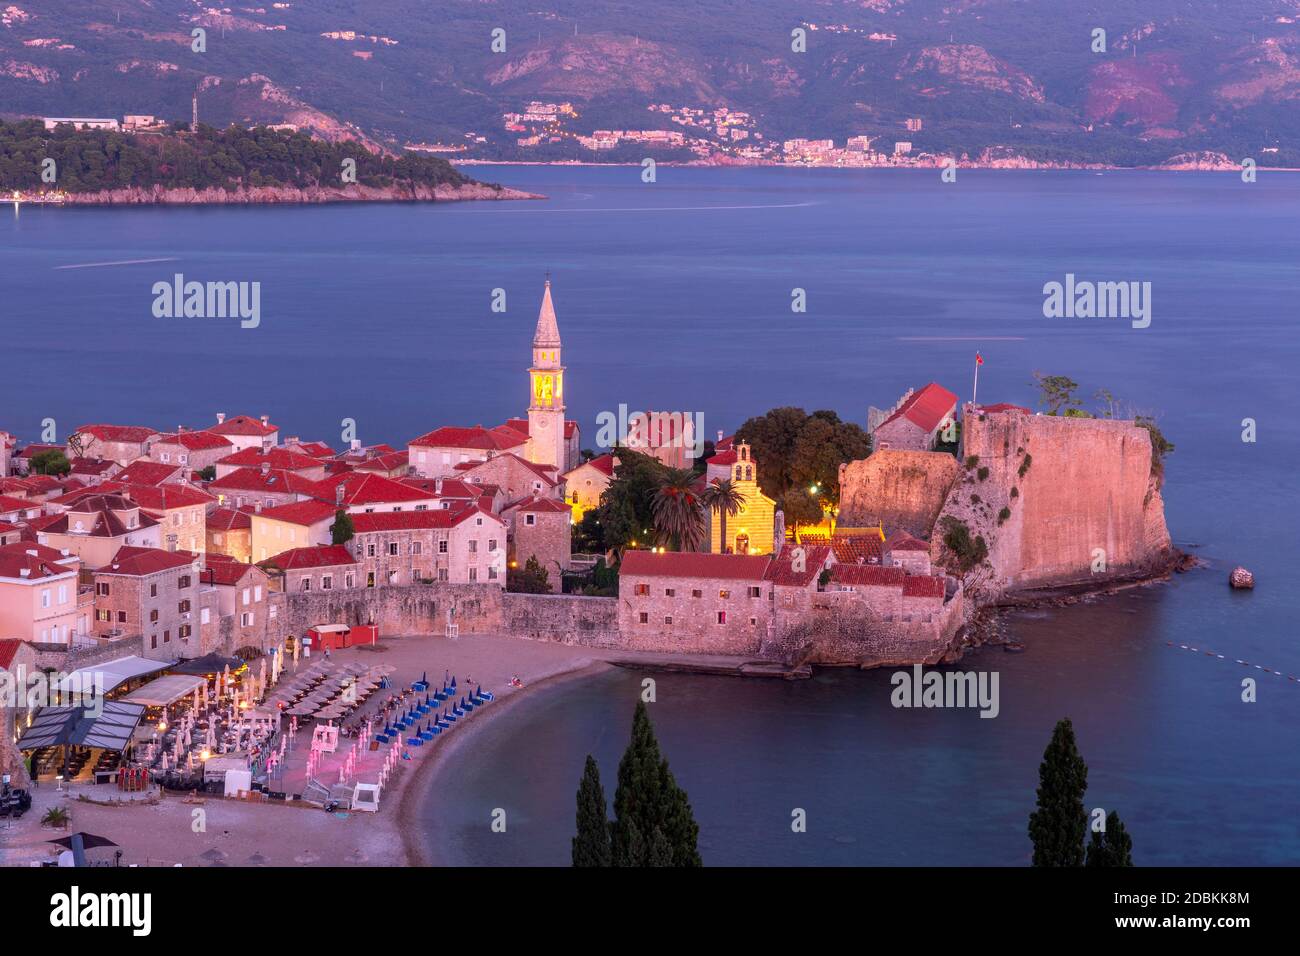 Aerial view of Saint Ivan and Holy Trinity churches in Old Town of Montenegrin town Budva on the Adriatic Sea at sunset, Montenegro Stock Photo